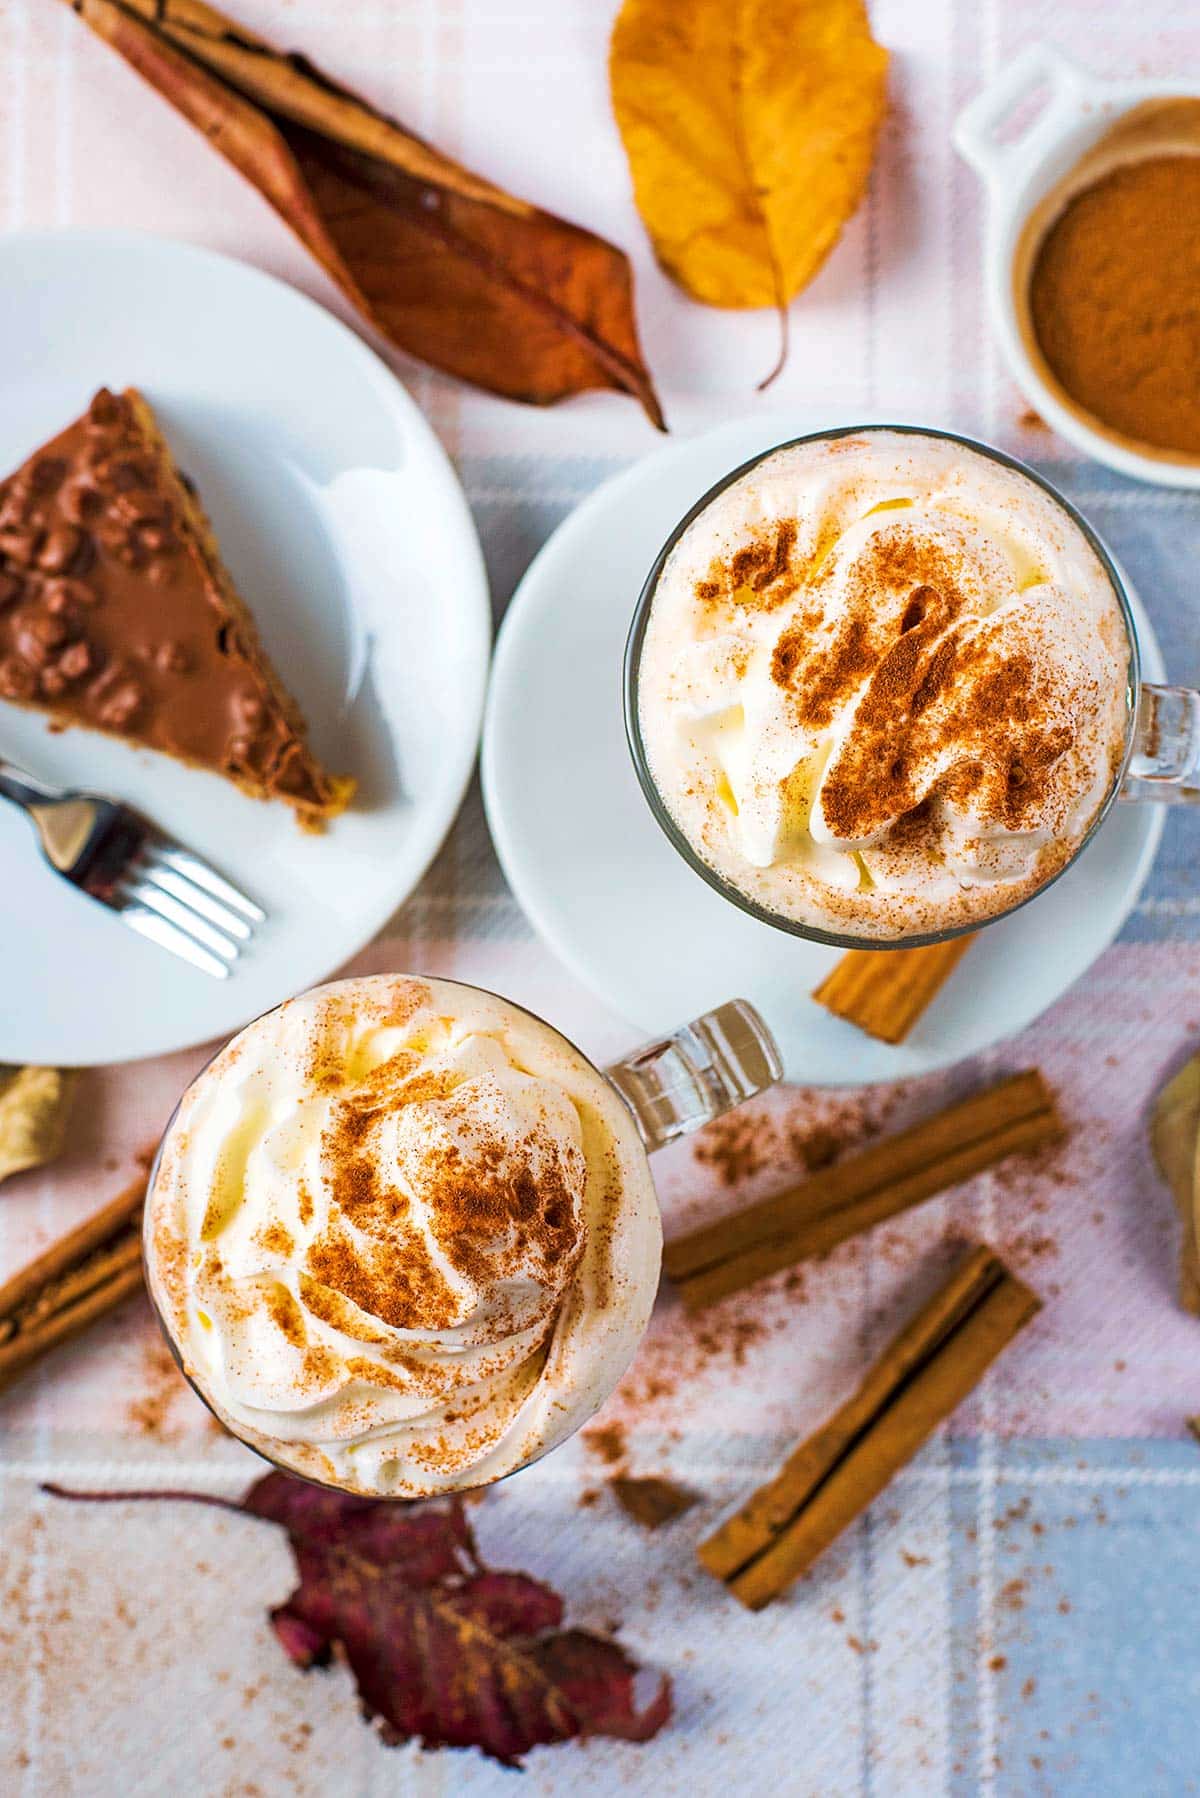 Two glasses of coffee, topped with cream and dusted with cinnamon. A slice of cake is next to them.